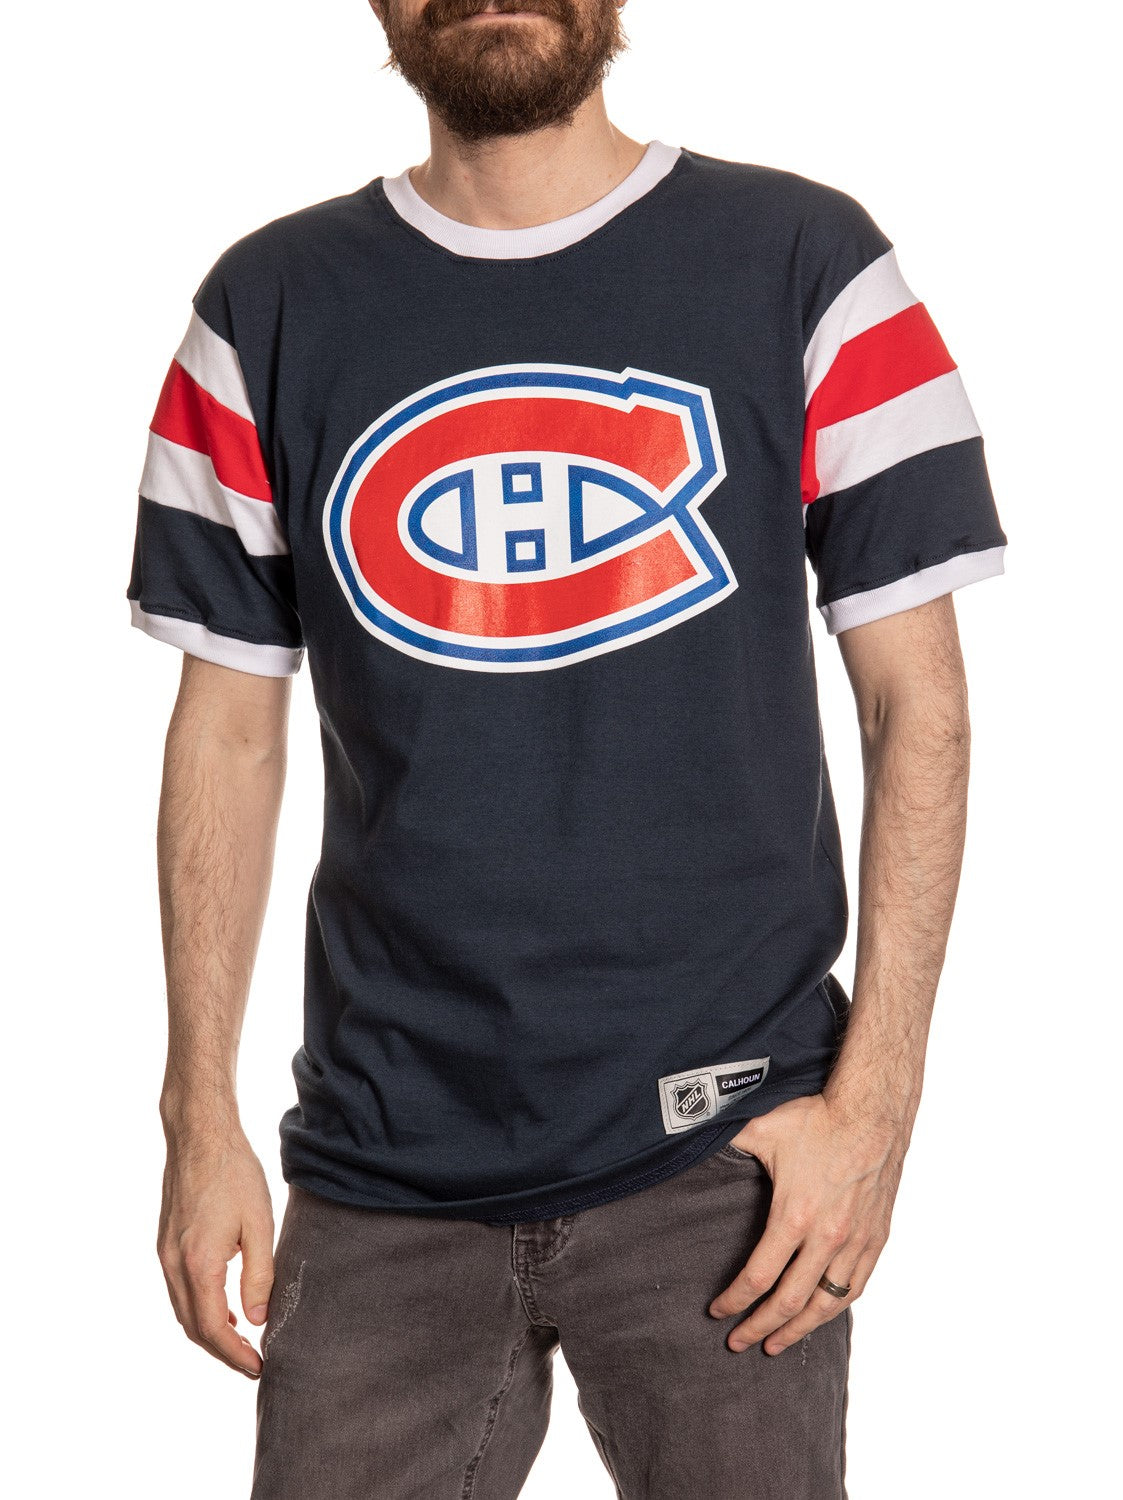 Montreal Canadiens Varsity T-Shirt Front View. Blue Shirt With Red, White and Blue Sleeve